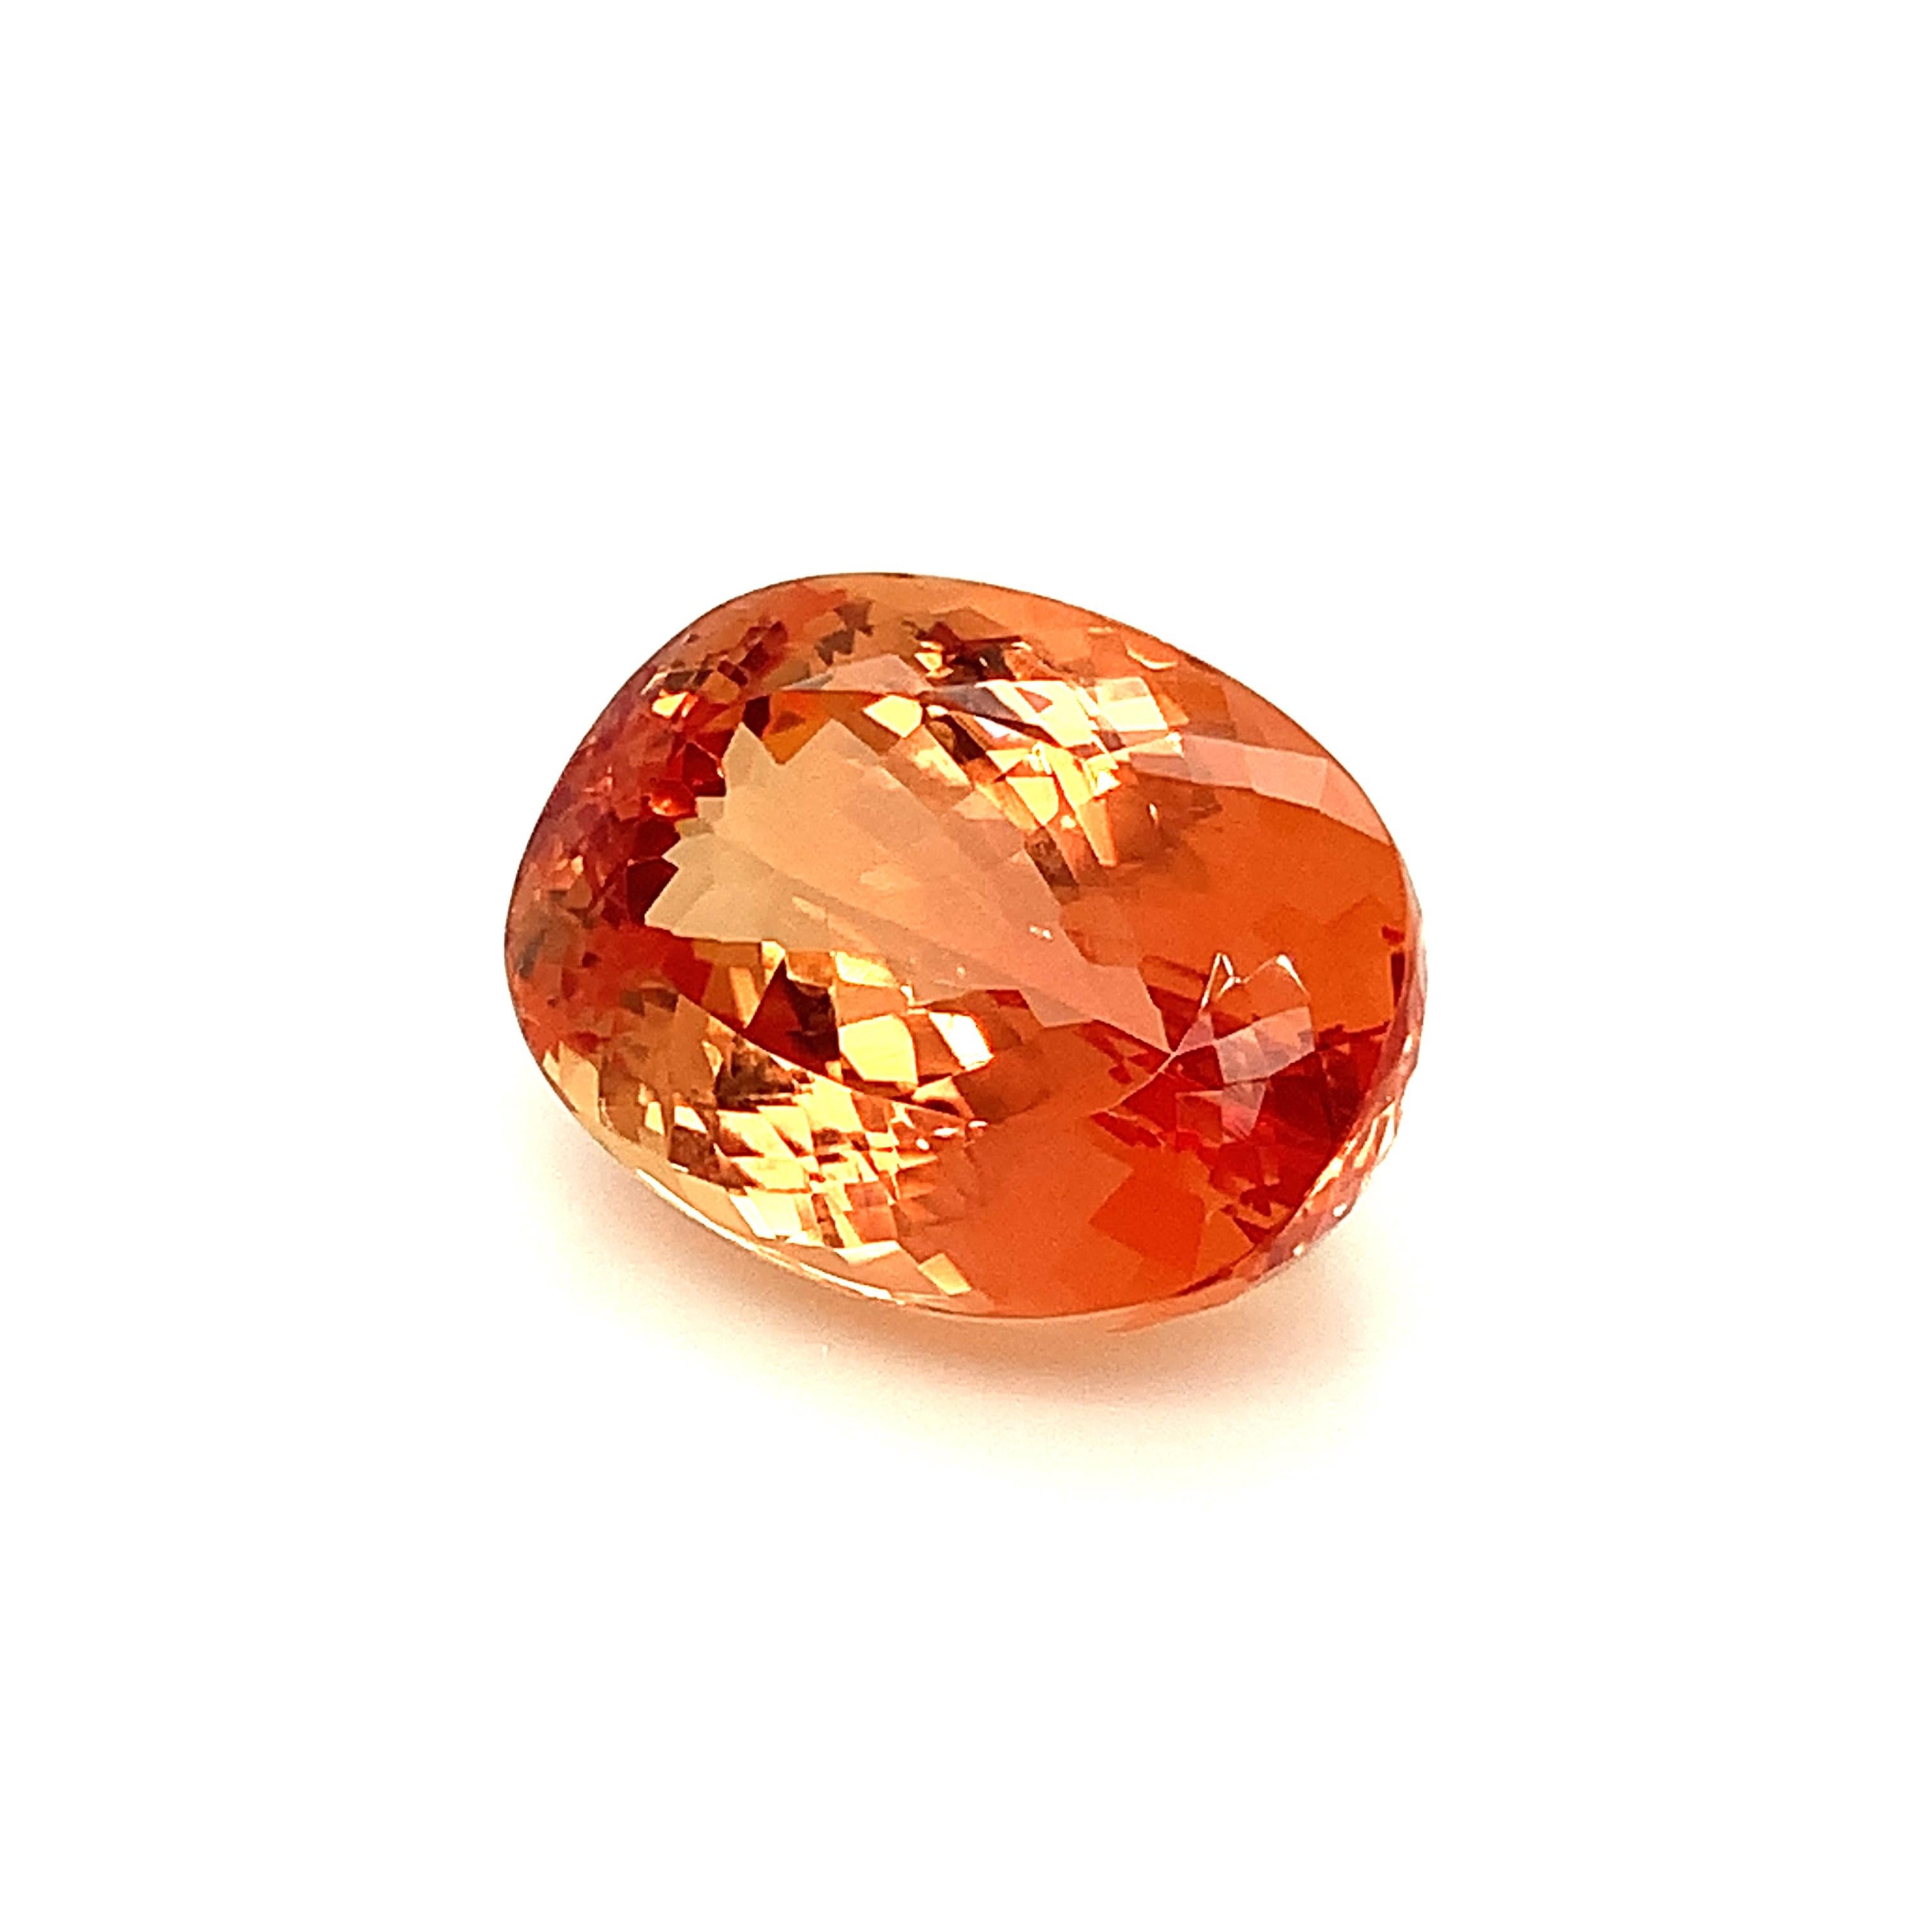 Women's or Men's 33.95 Carat Imperial Topaz Cushion, Unset Loose Gemstone, GIA Certified For Sale